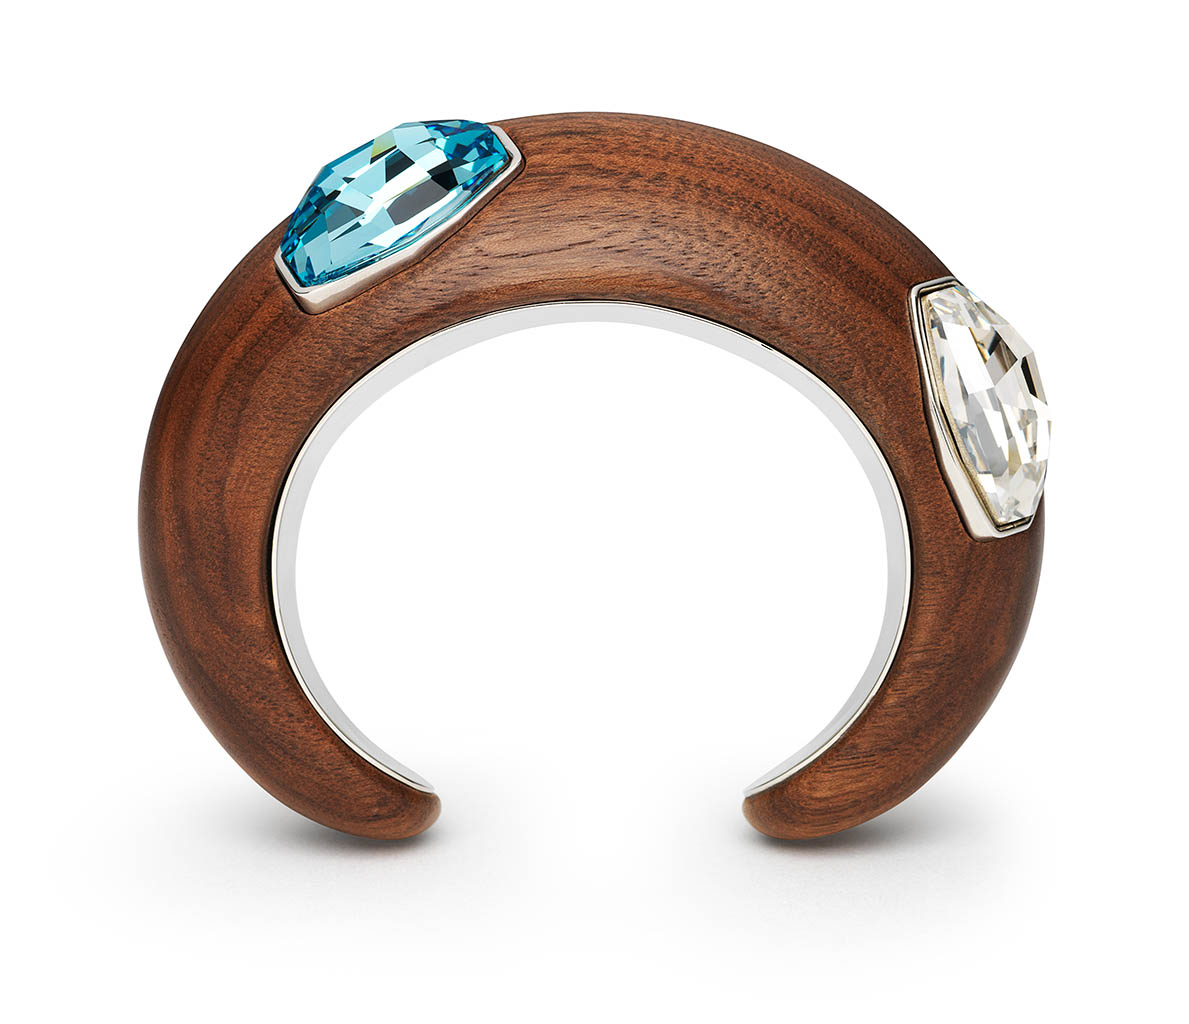 Packshot Factory - White background - Swarovsky & Kutur wood cuff with crystals